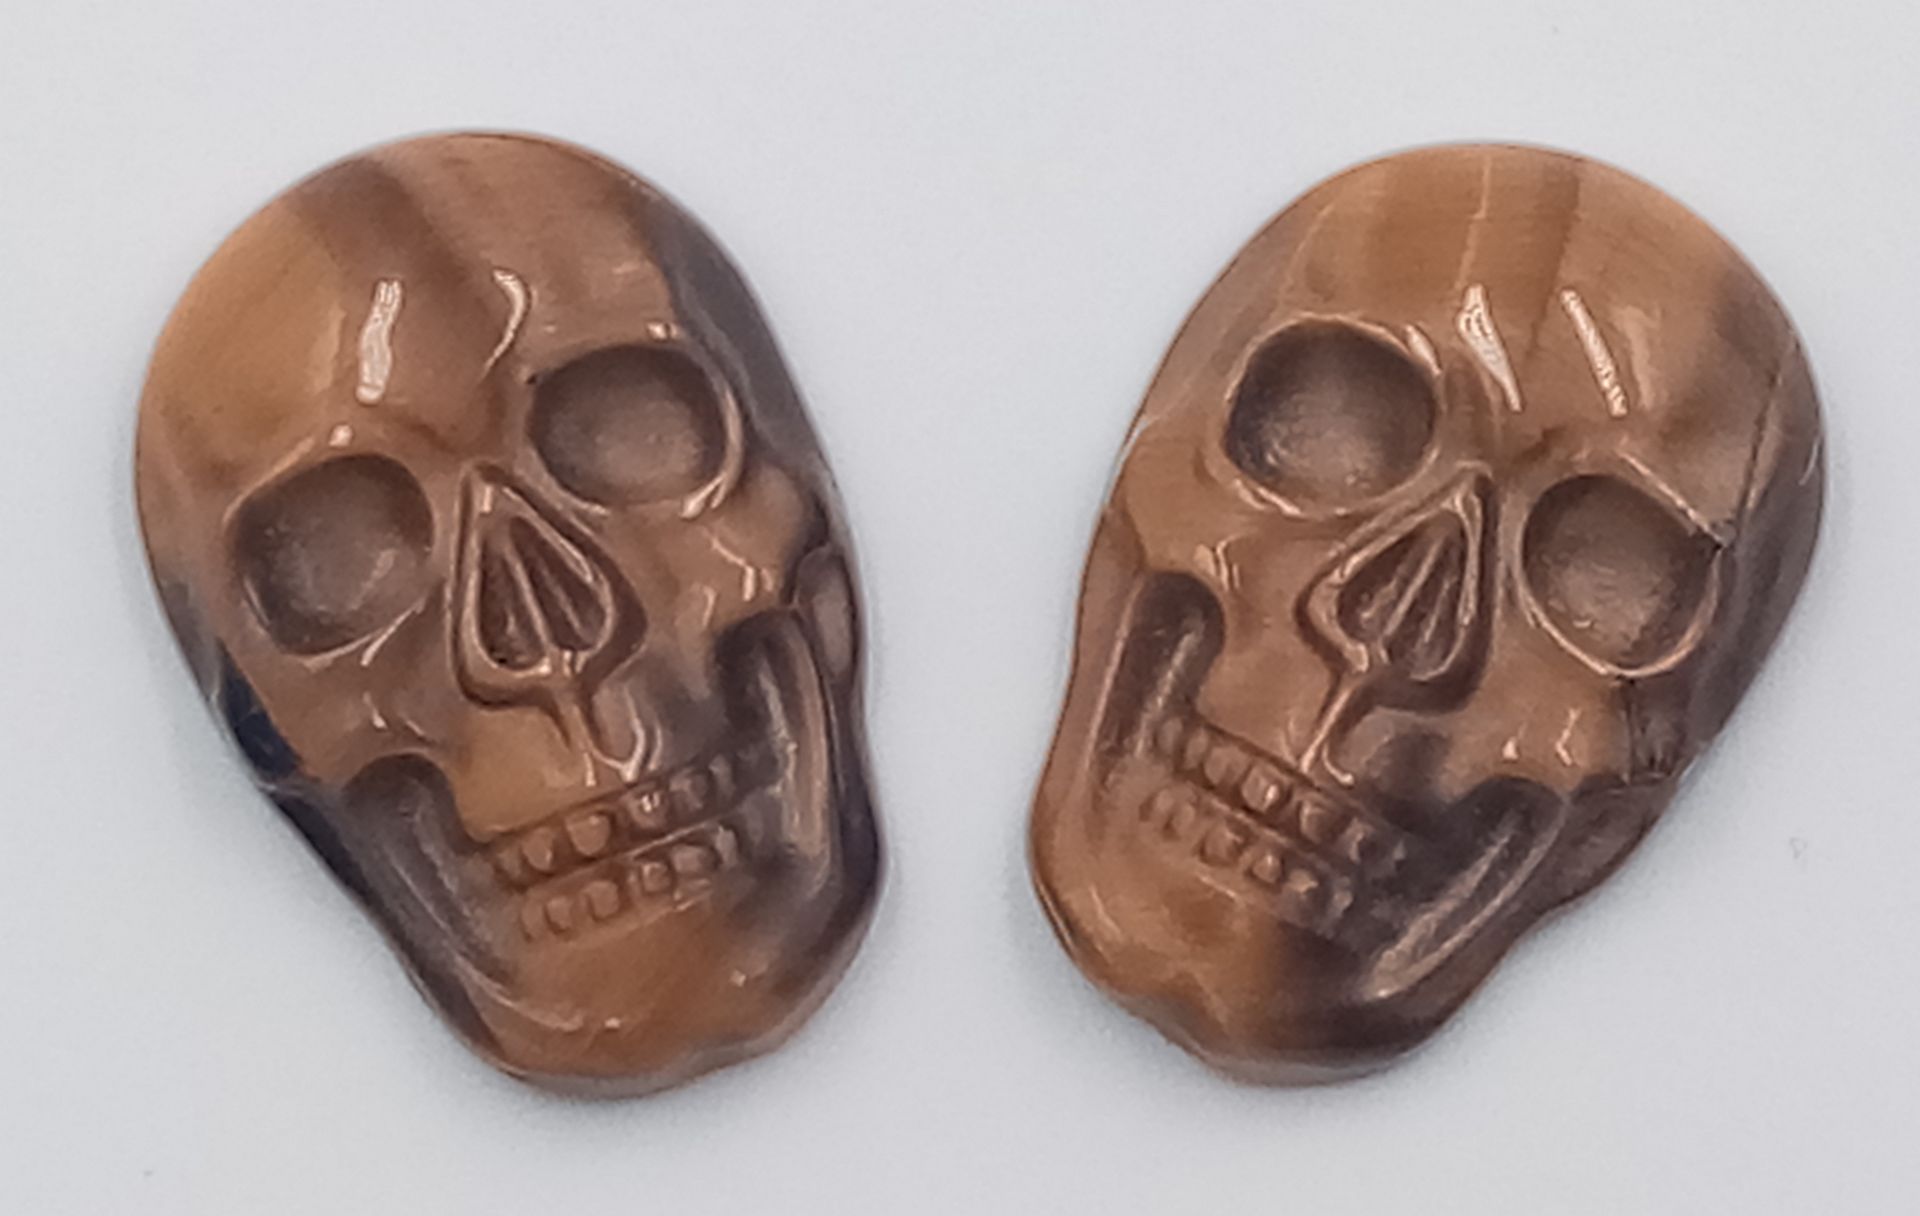 A PAIR OF TIGERS EYE CARVED MATCHING SKULLS - VERY RARE AND UNUSUAL. 20MM X 15.5MM